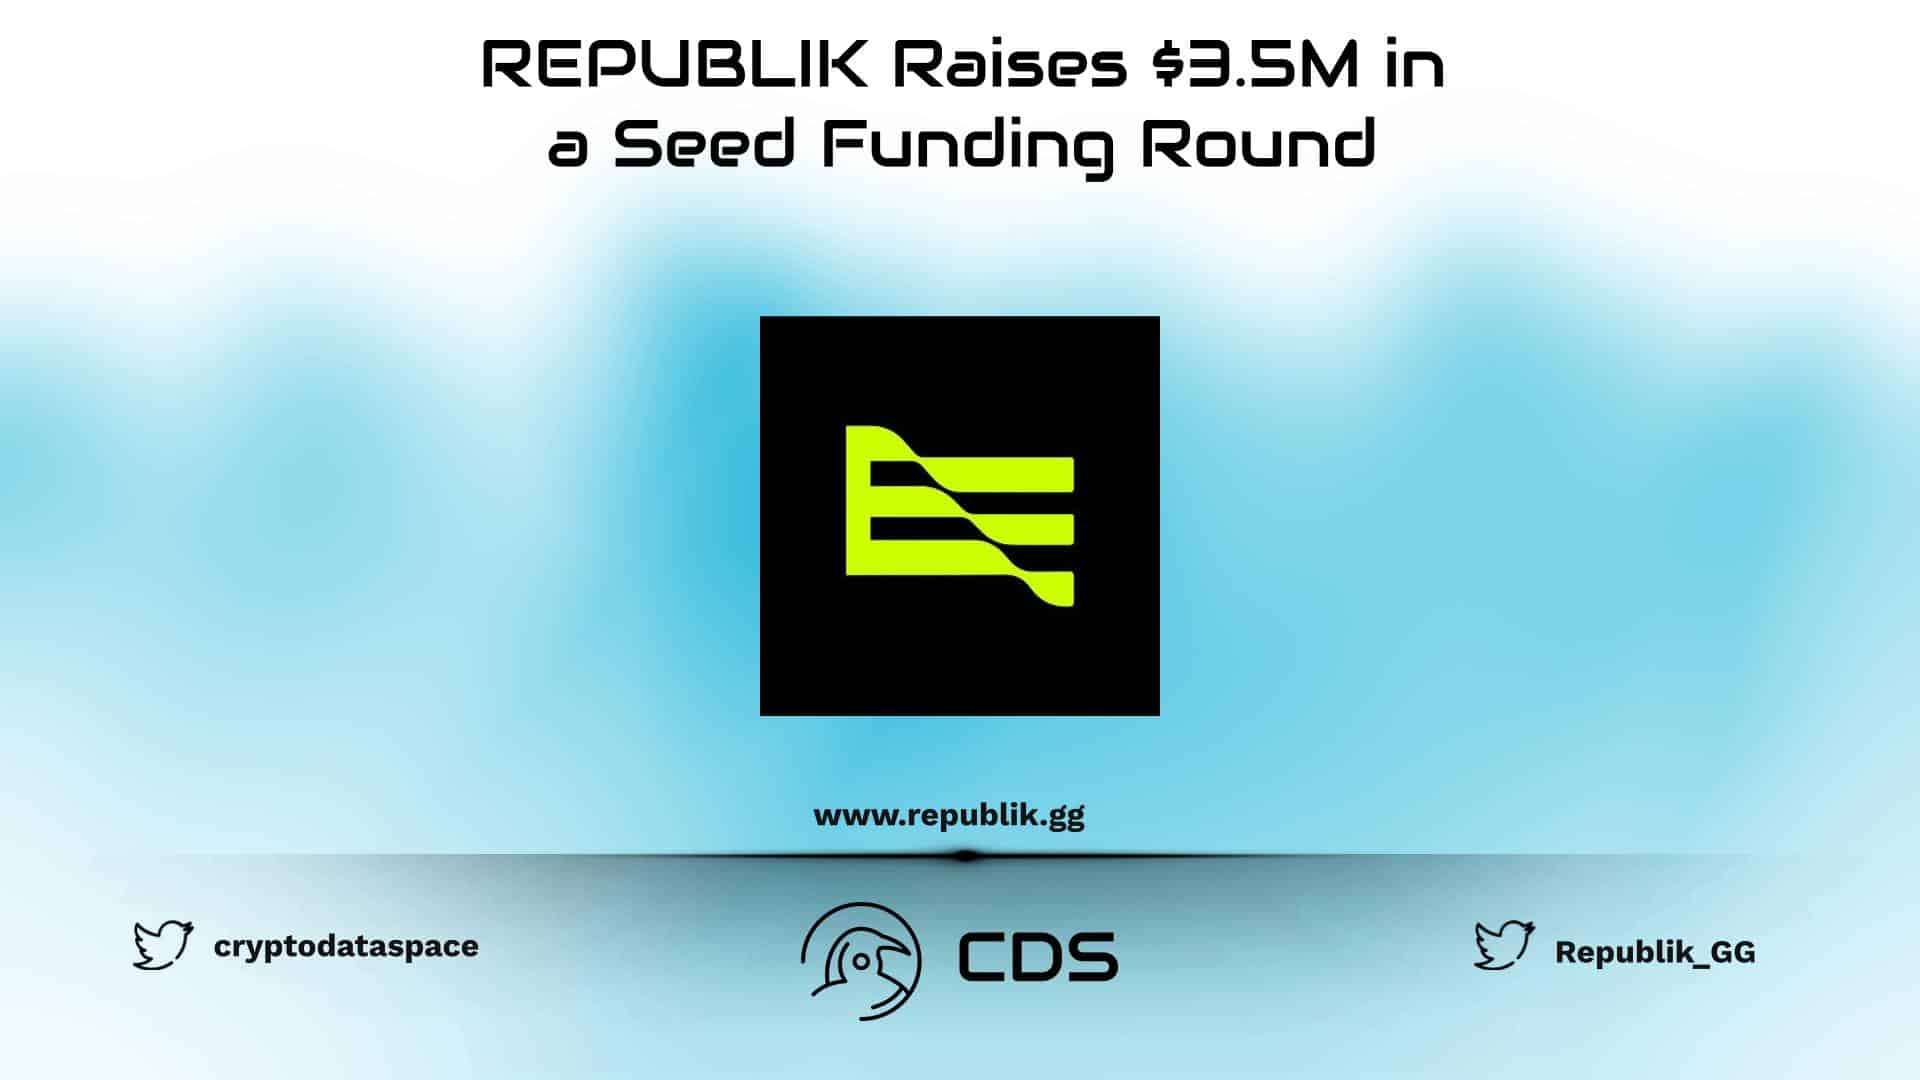 REPUBLIK Raises $3.5M in a Seed Funding Round